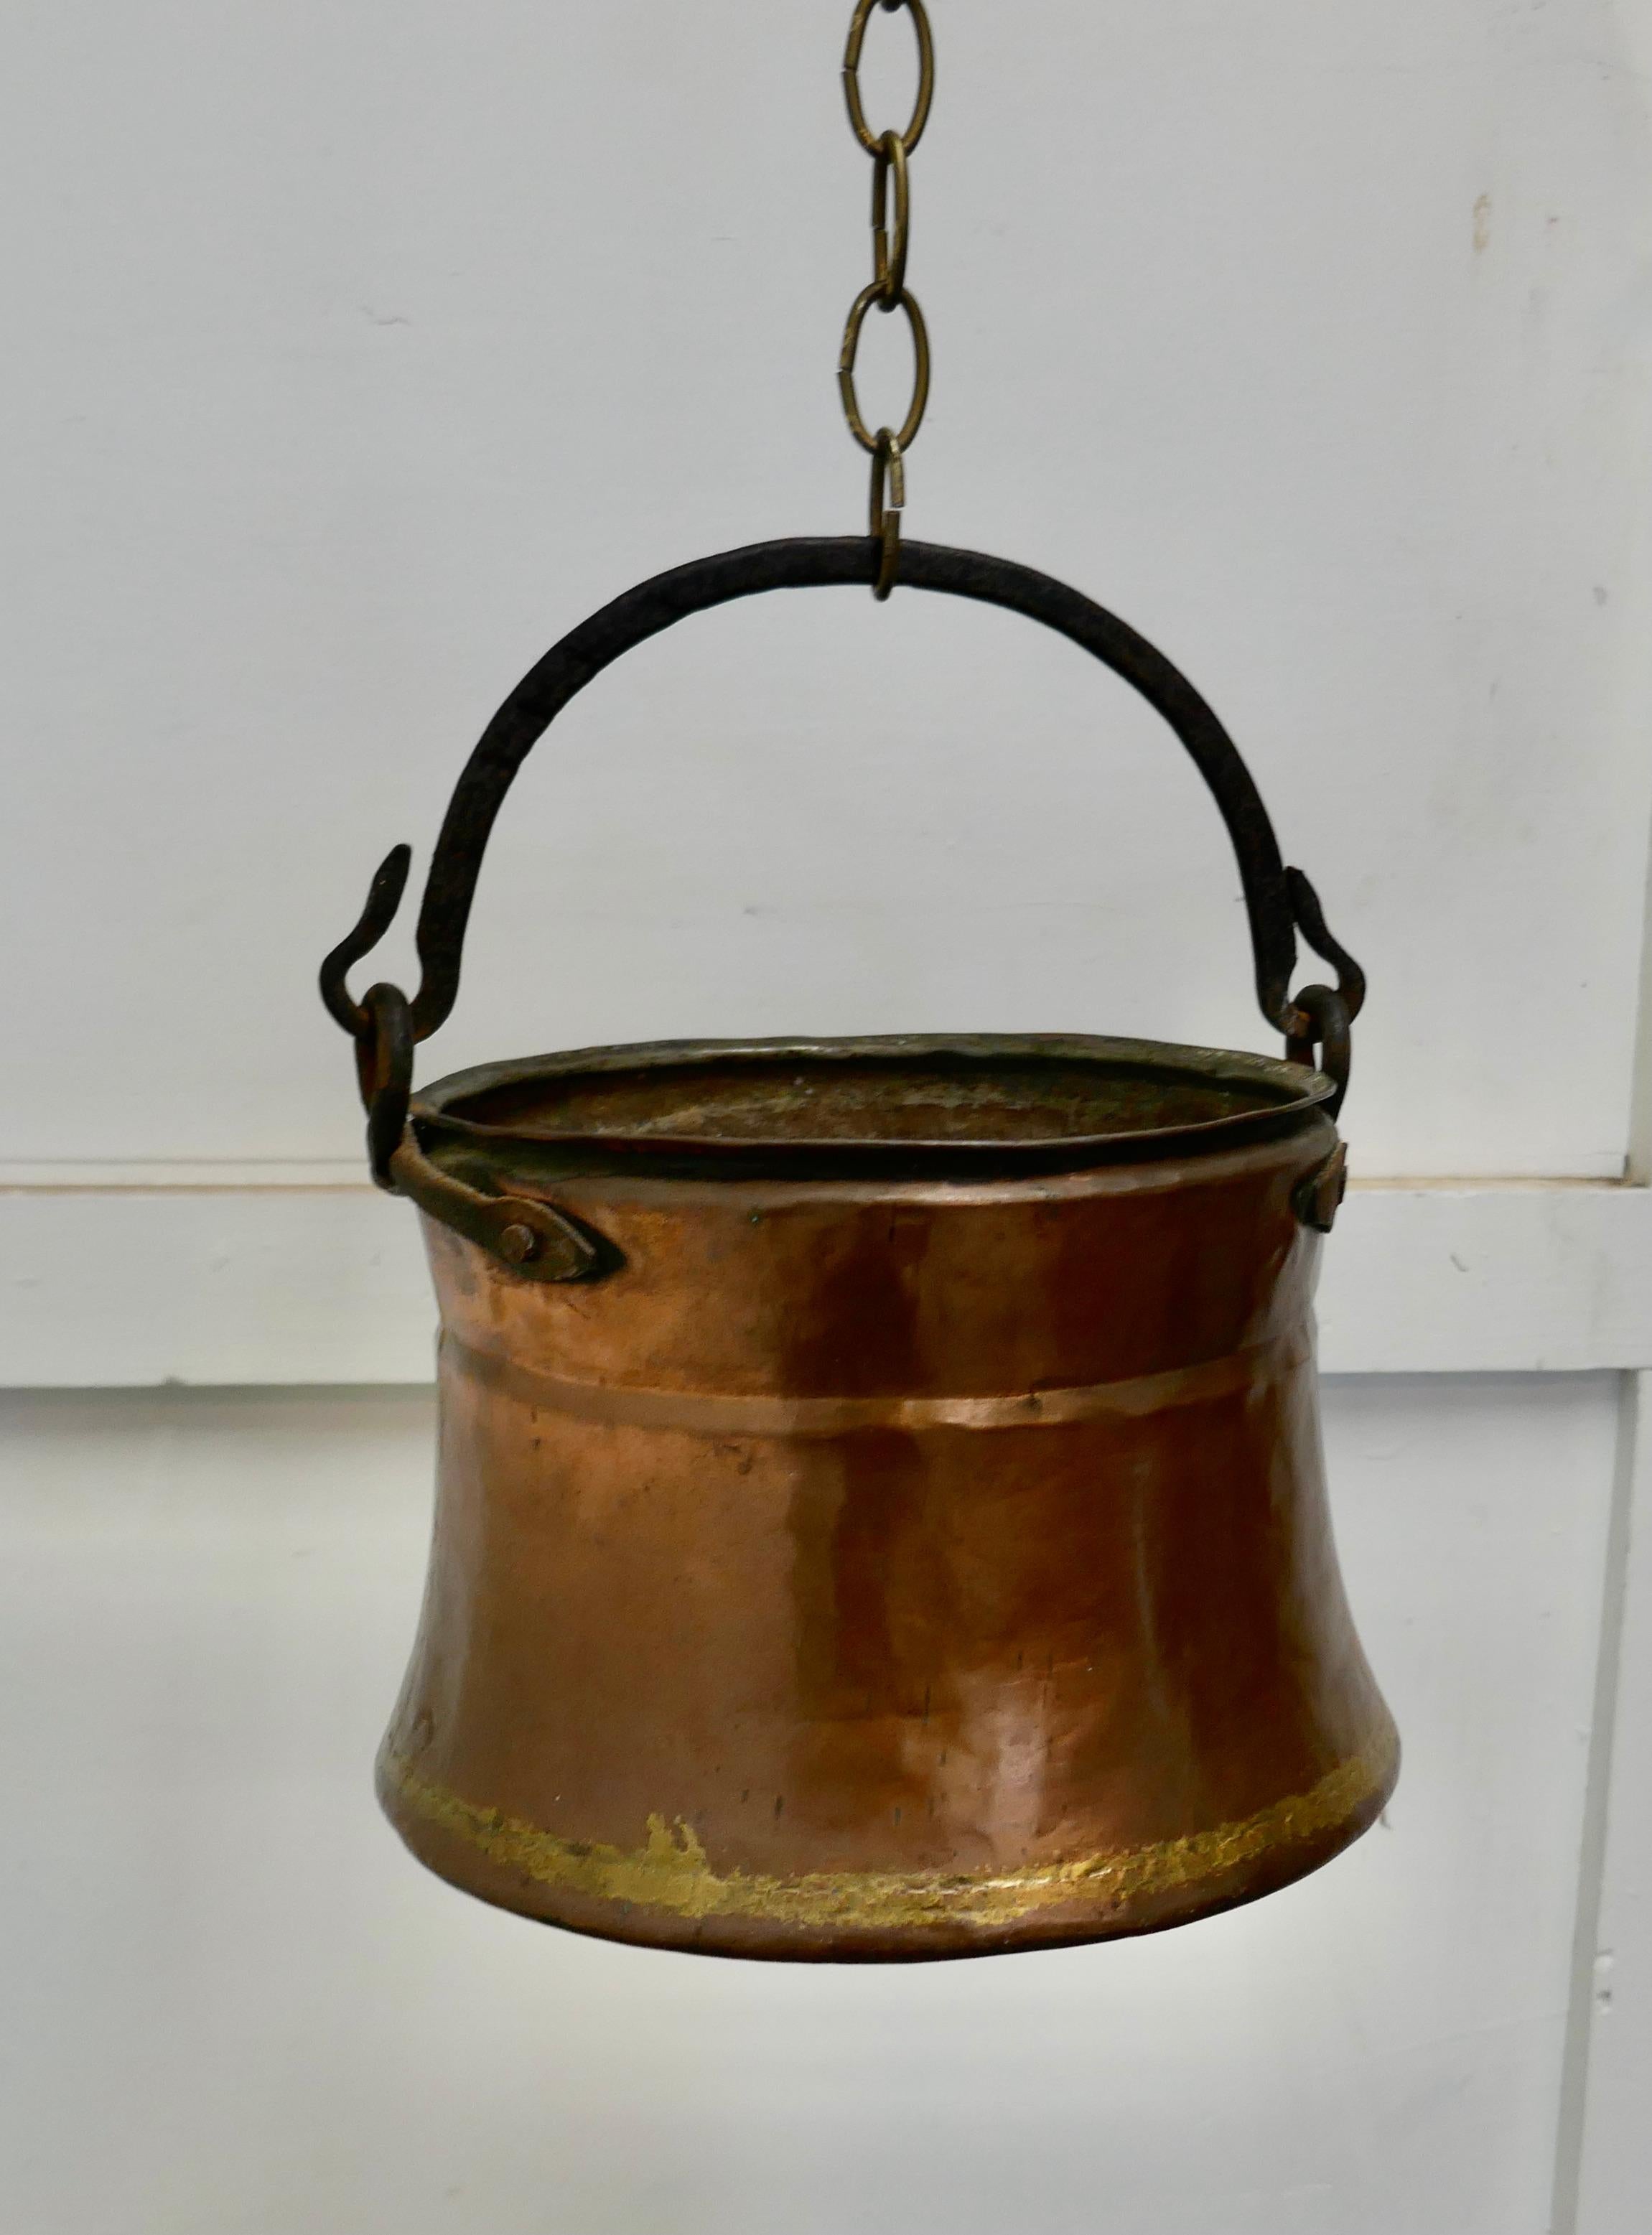 19th century beaten copper cooking pot, cauldron

This is a lovely early cooking pot, it is made in beaten copper, slightly flaring out at the bottom, to catch the maximum heat from the fire 
The pot has a rolled top, brass brazing and the Iron